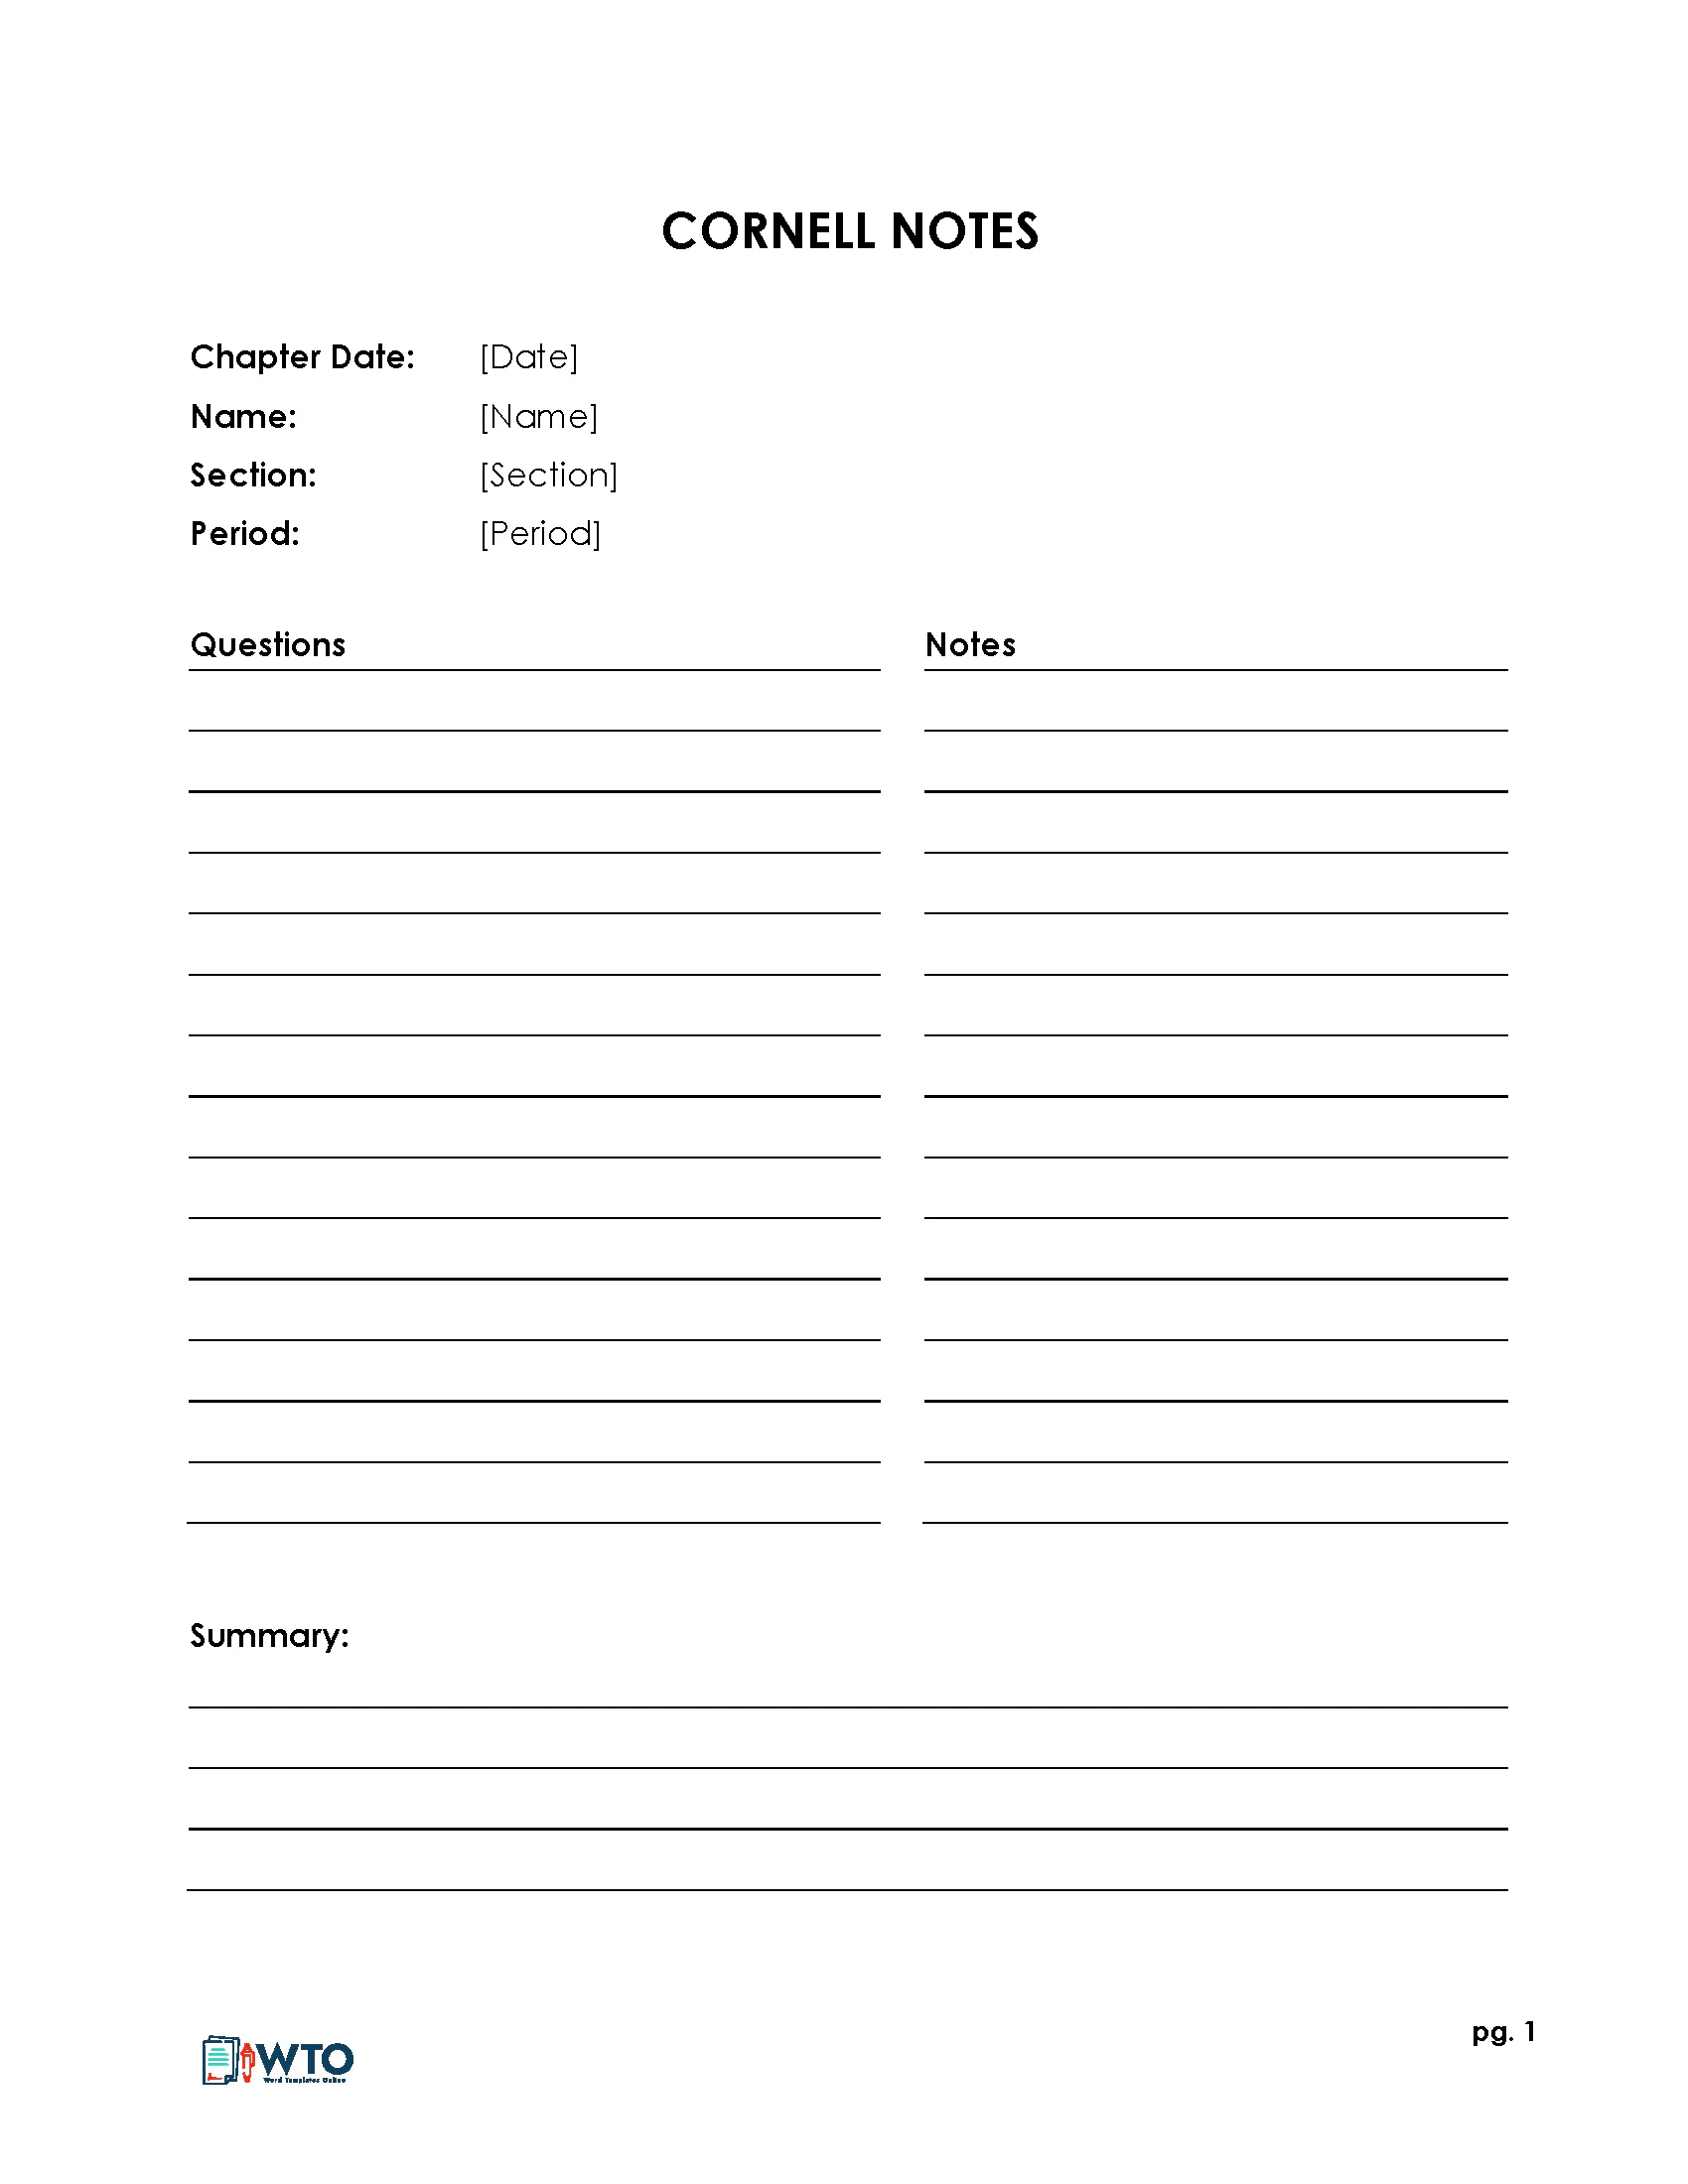 40 Free Cornell Note Templates With Cornell Note Taking Explained